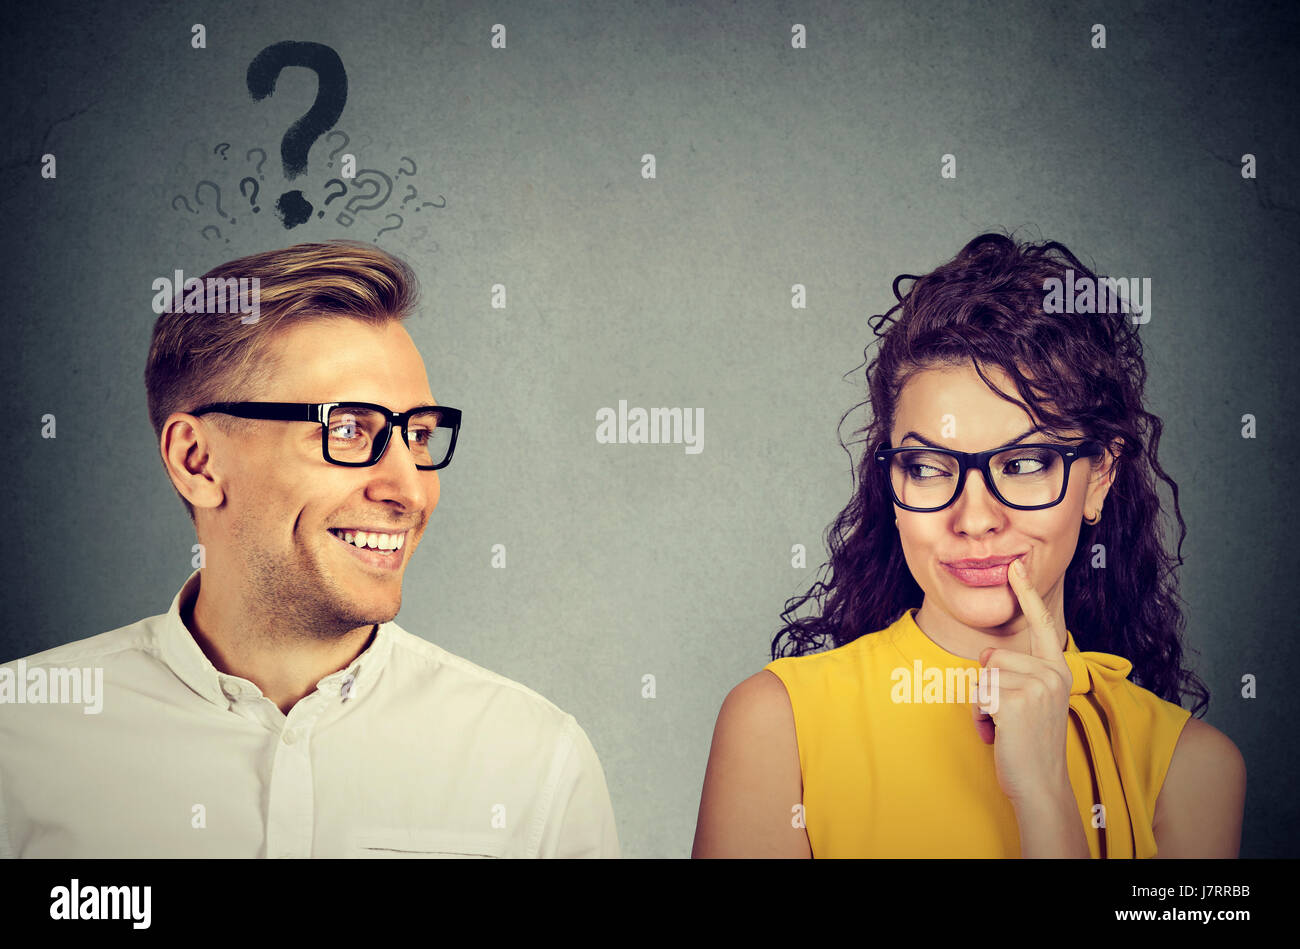 Does she like me? handsome man with question mark looking at an attractive girl flirting with him. Human emotions face expression perception Stock Photo